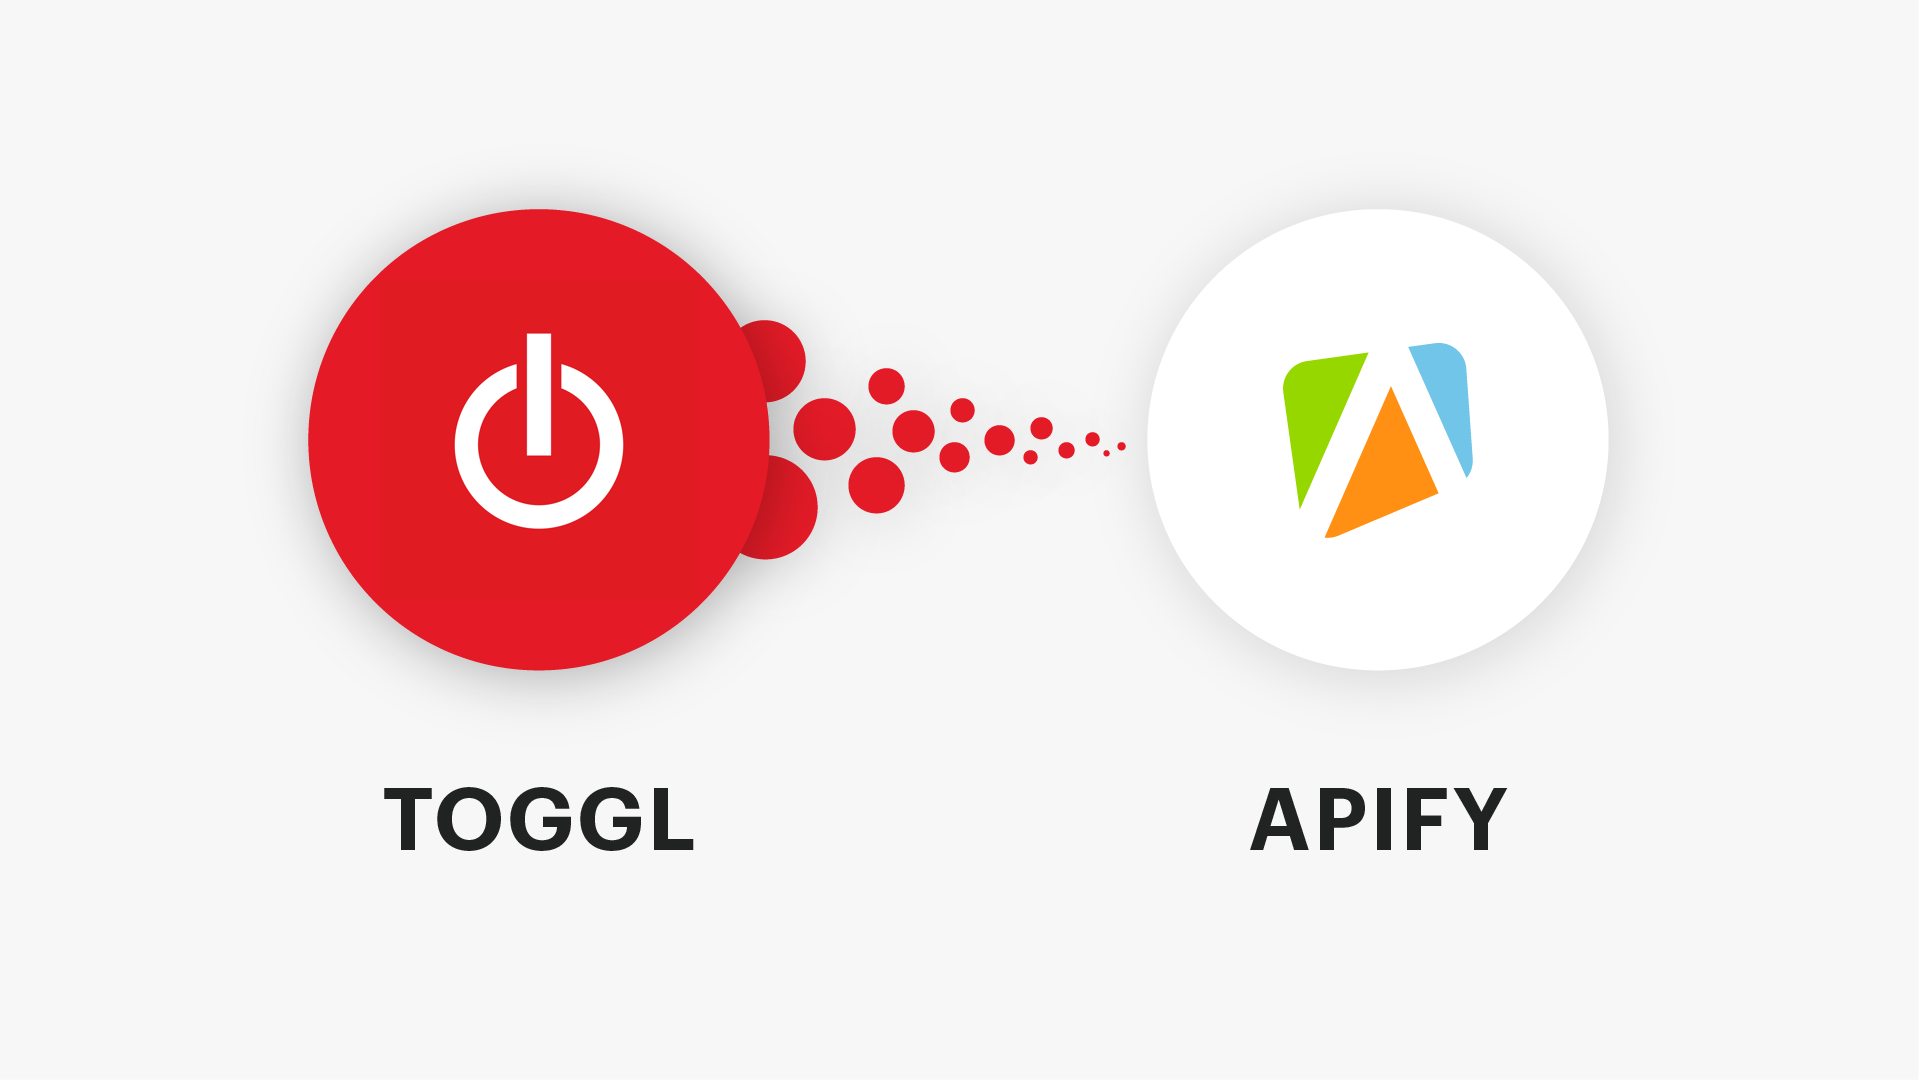 Toggl logo connecting with the Apify logo